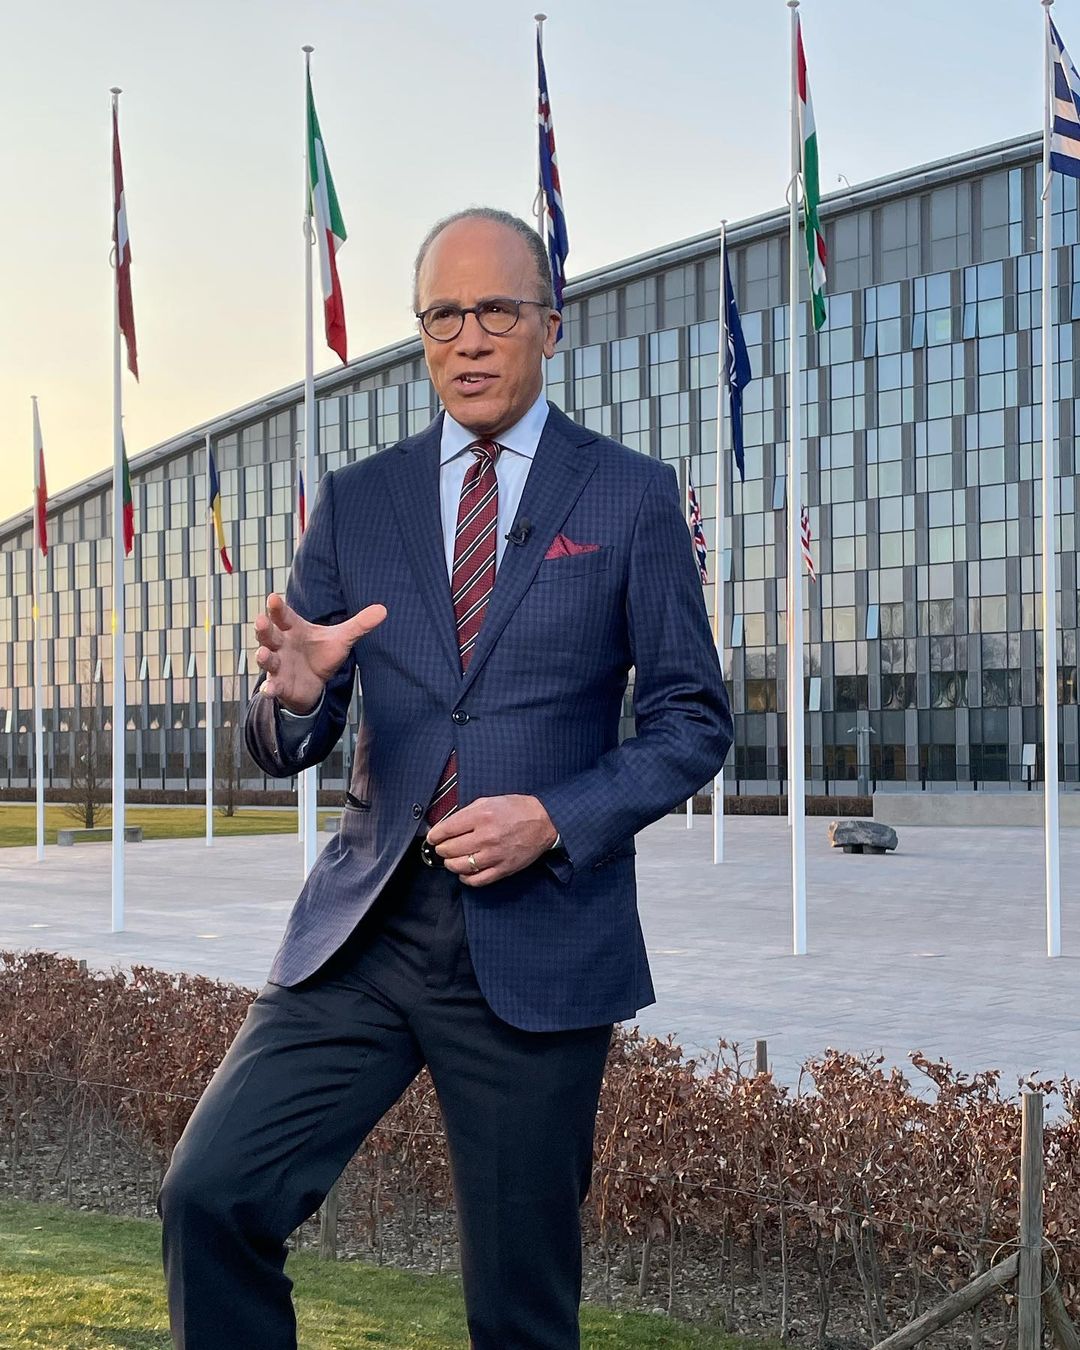 Lester Holt has not given any updates about his health.